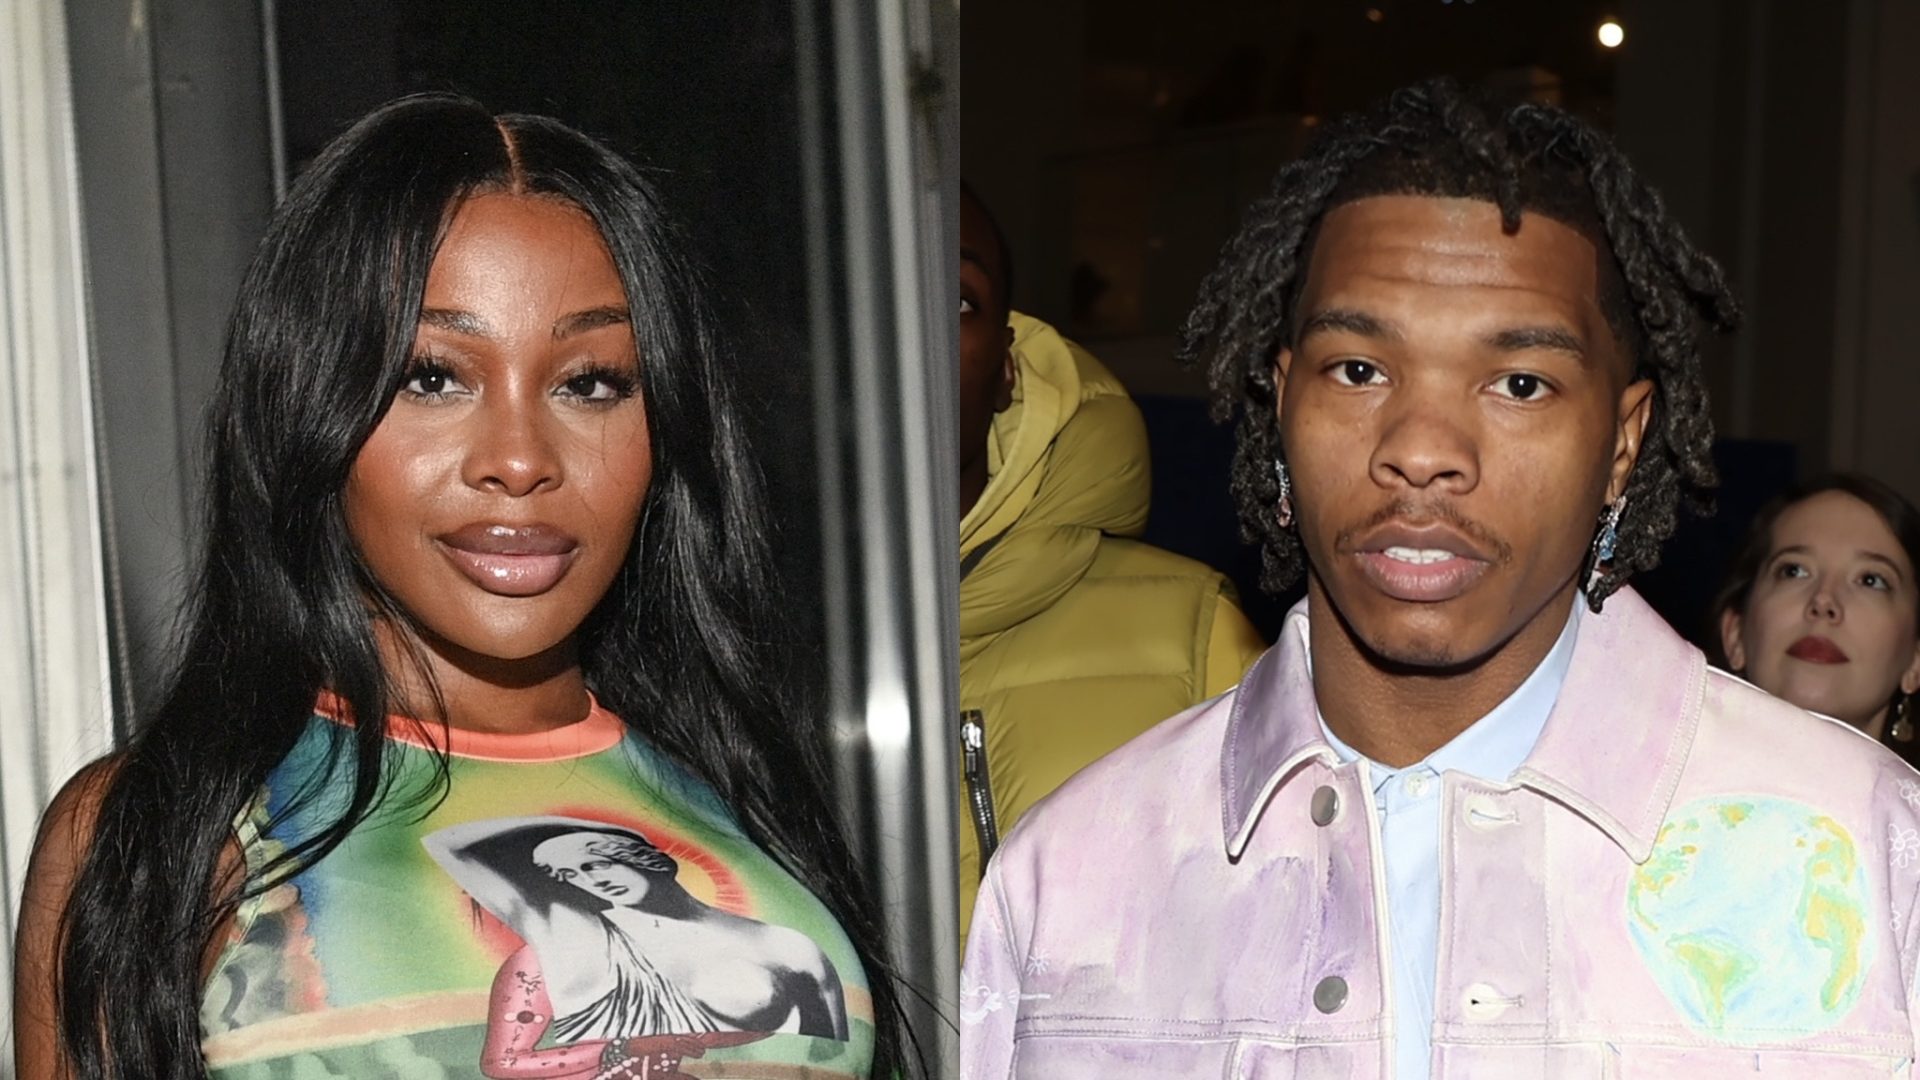 Oop! Jayda Cheaves Speaks Out After She & Lil Baby Are Spotted Out Together (Video)